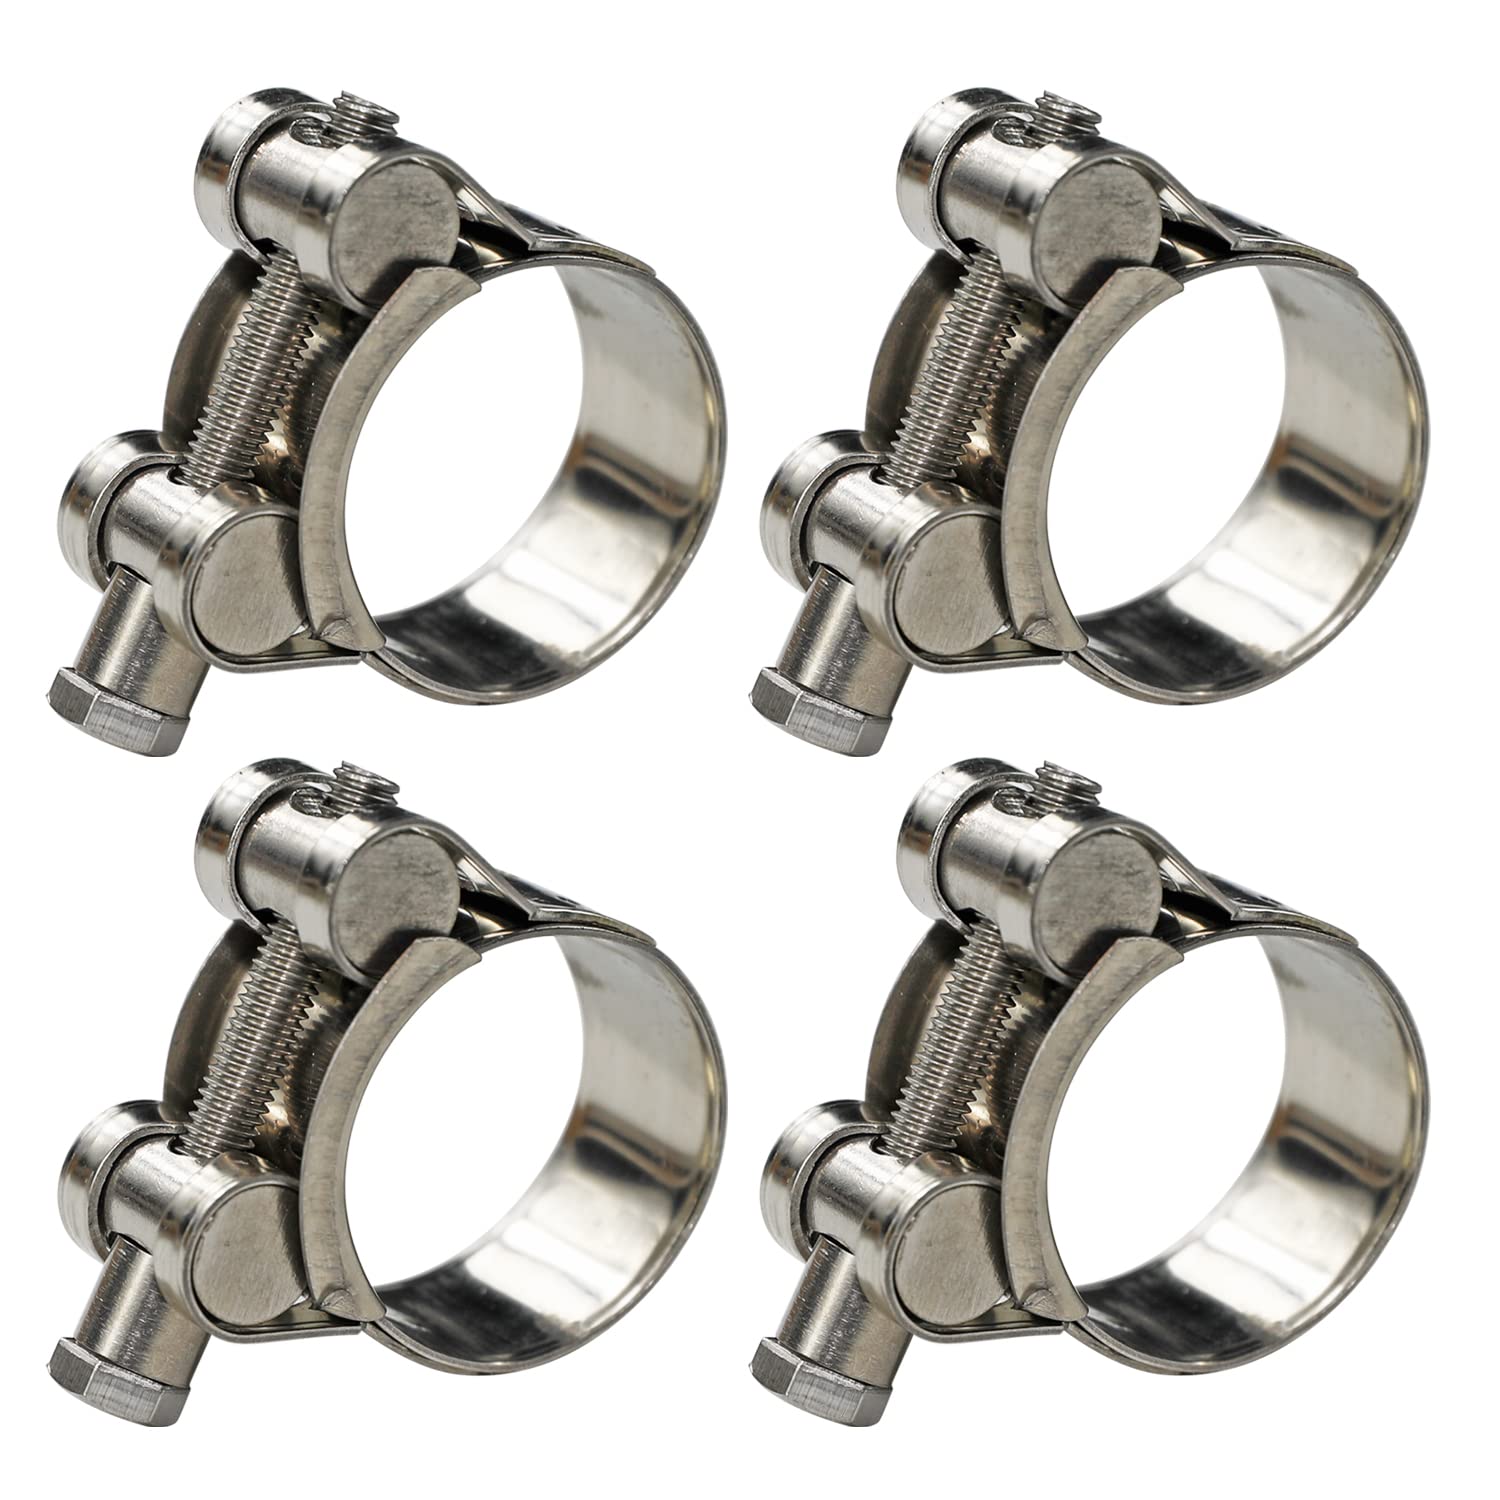 Tee Clamps